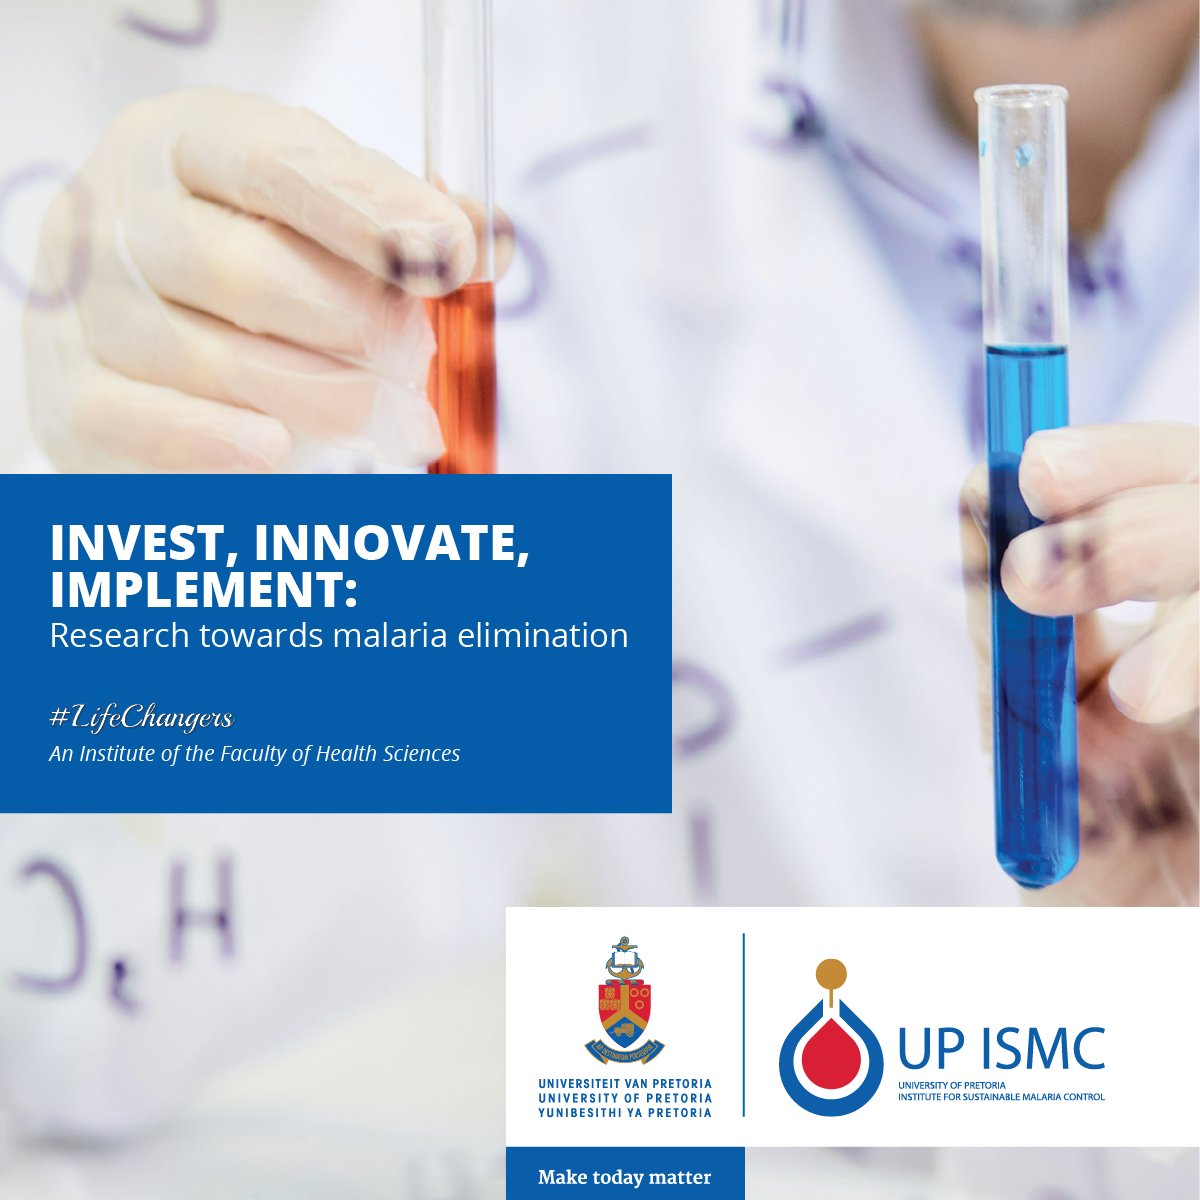 Research guides malaria interventions, ensuring a holistic approach to combating this deadly disease and #EndMalaria for good. Read more 👇up.ac.za/up-institute-f…
#Malaria #ZeroMalariaStartsWithMe #MalariaAwareness #MalariaElimination #innovation #investment #upismc #lifechangers